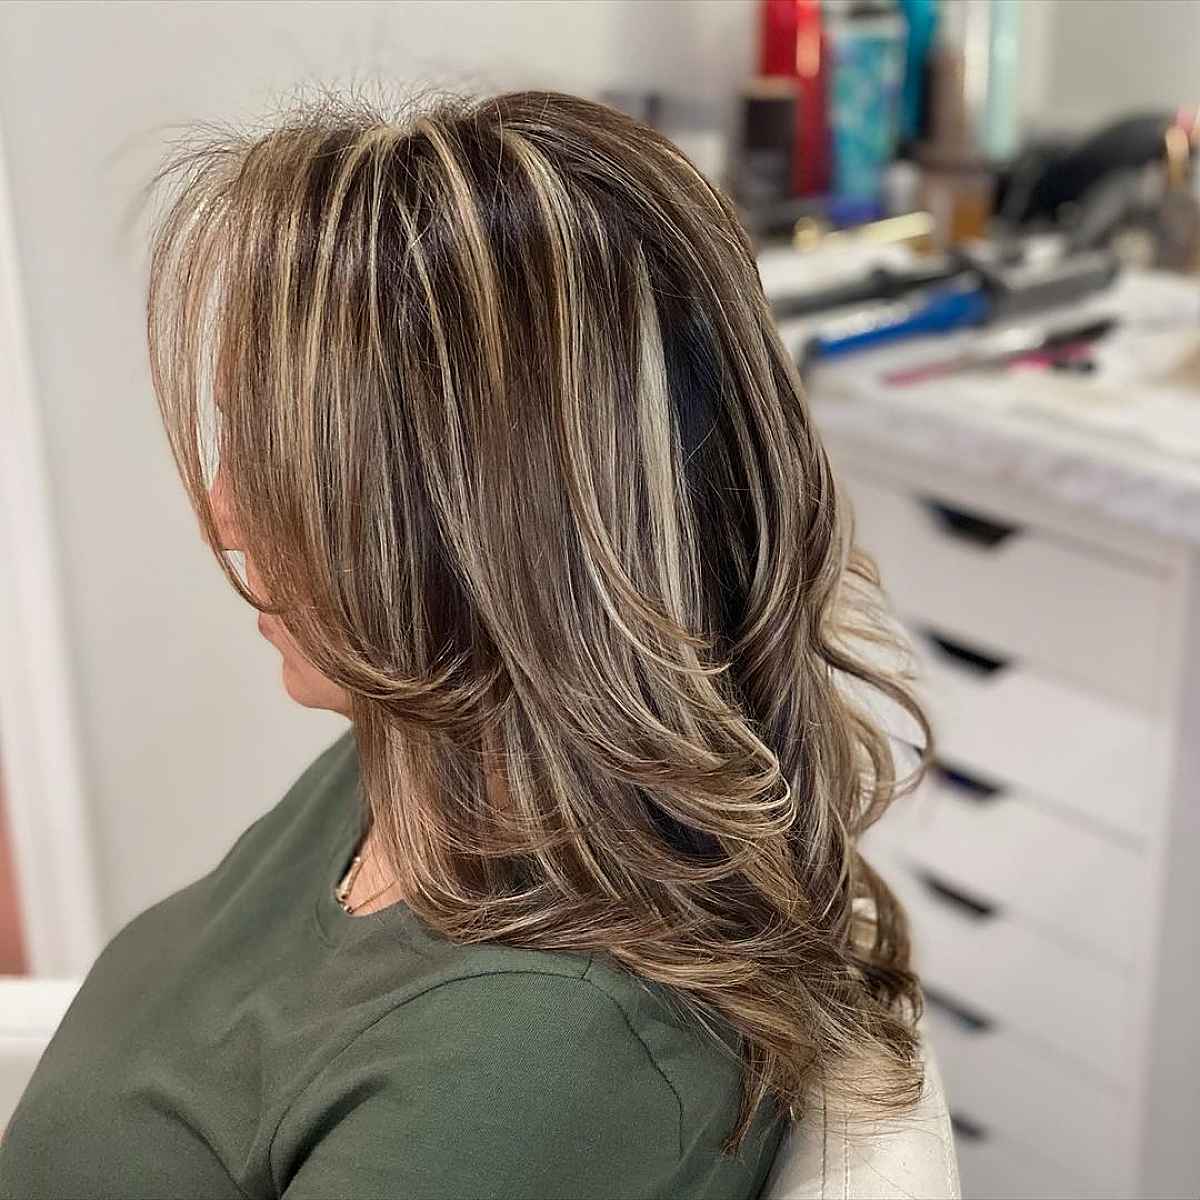 Medium hair with Long Layers with Blonde Highlights